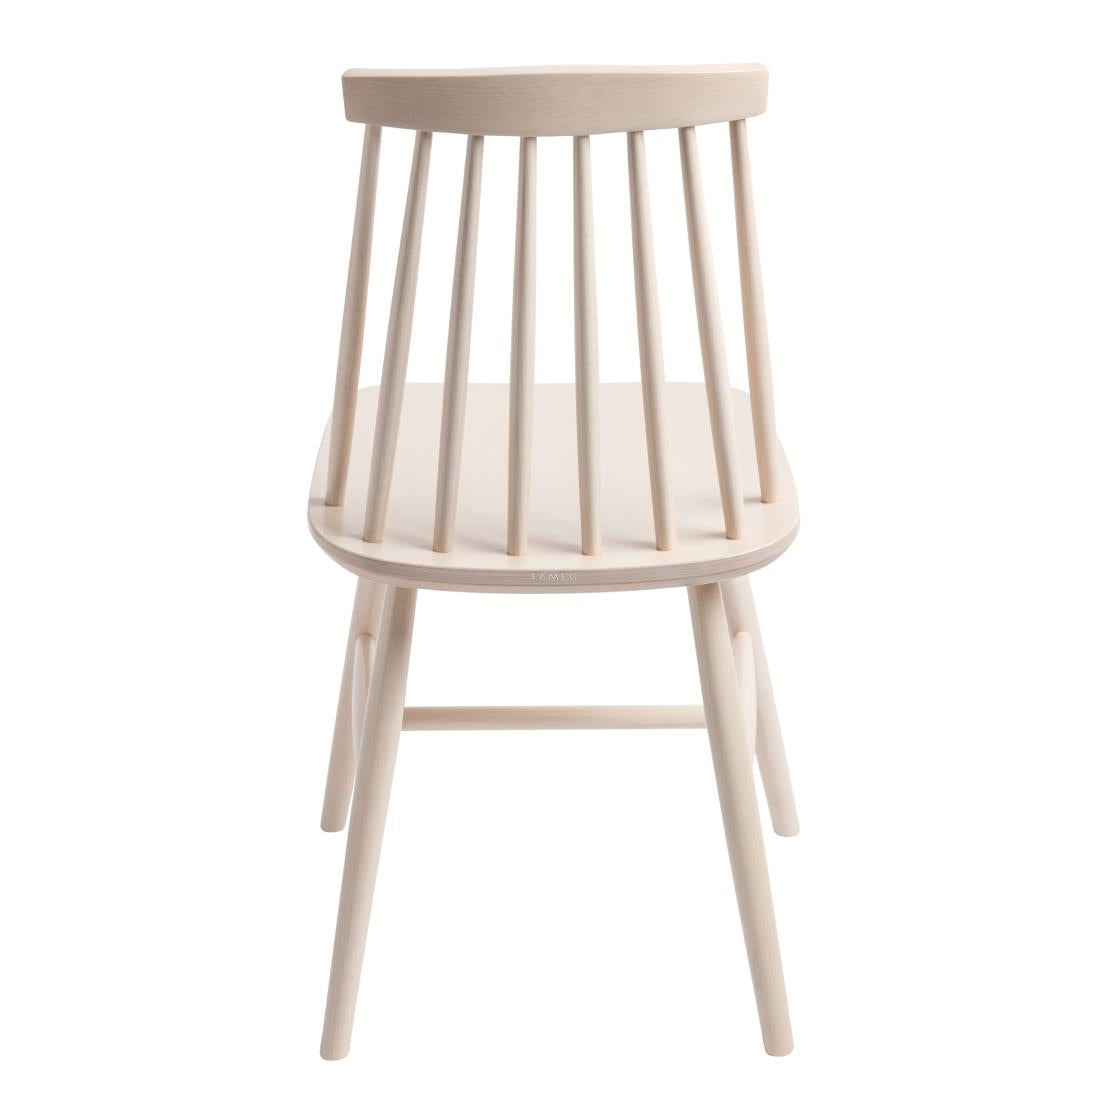 DC354 Fameg Farmhouse Angled Side Chairs White (Pack of 2) JD Catering Equipment Solutions Ltd